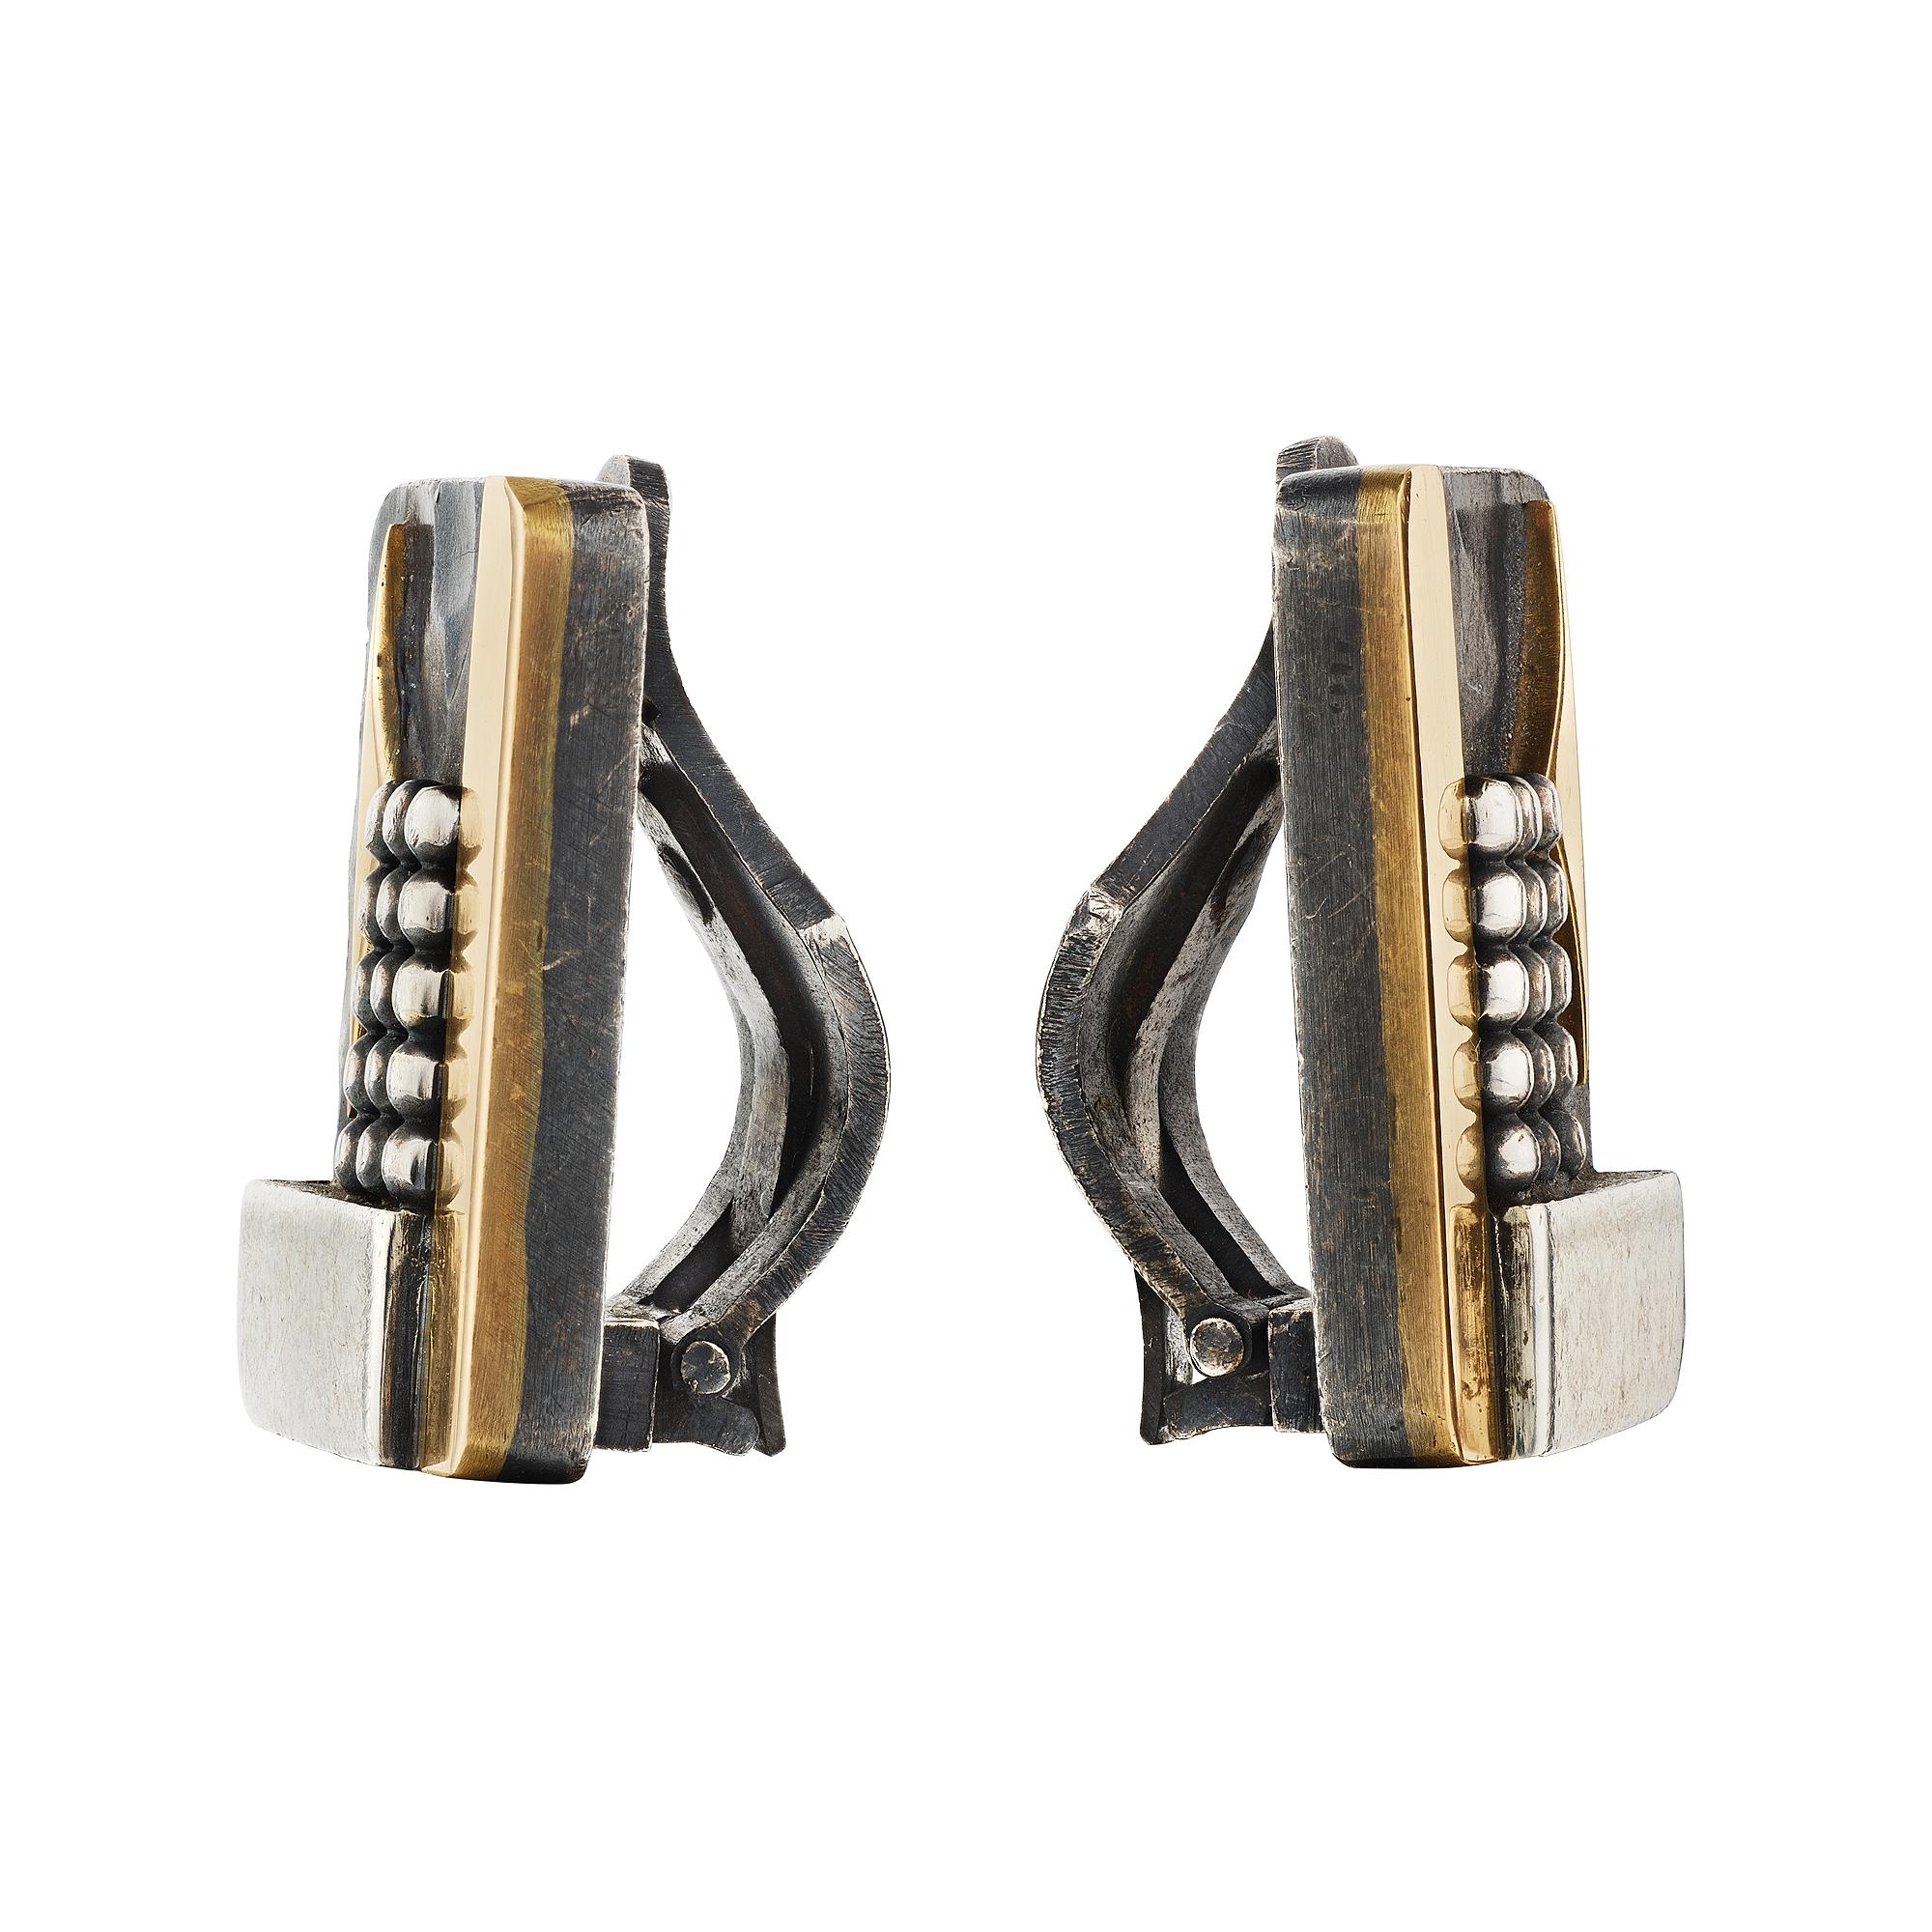 These original Jean Despres sterling silver and 18 karat yellow gold hand hammered modernist clip earrings are wearable 'fine art'.  With a rectangular design resembling a abstract collage, these incredible earrings have a one-of-a-kind artistic